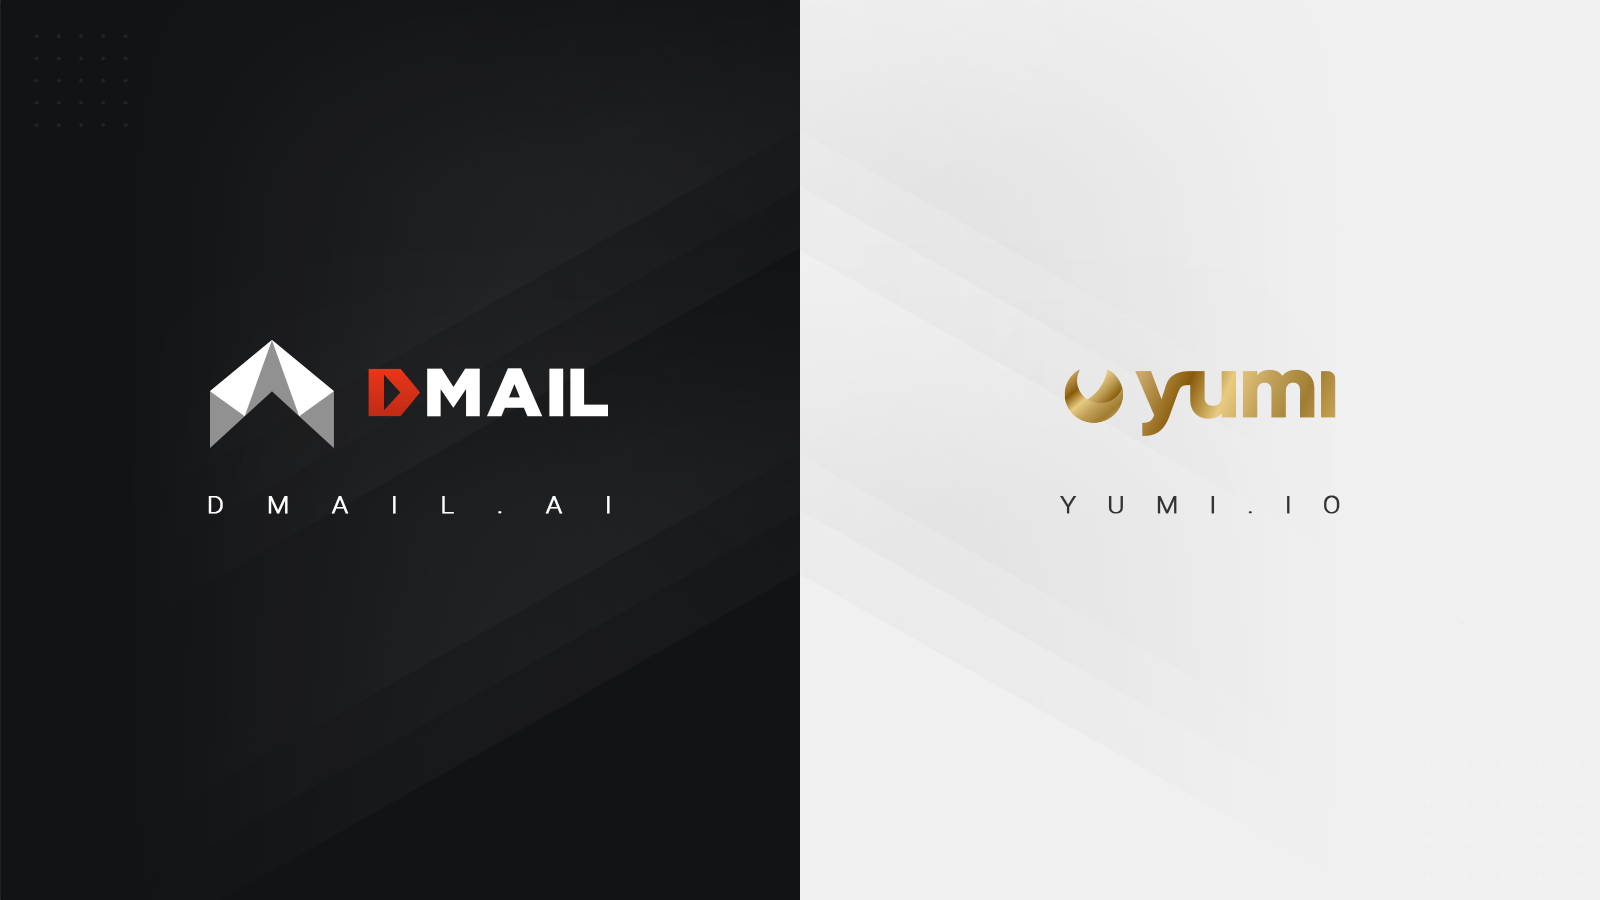 Yumi Marketplace Joins Forces with Dmail's SubHub to Expand Reach and Amplify User Engagement